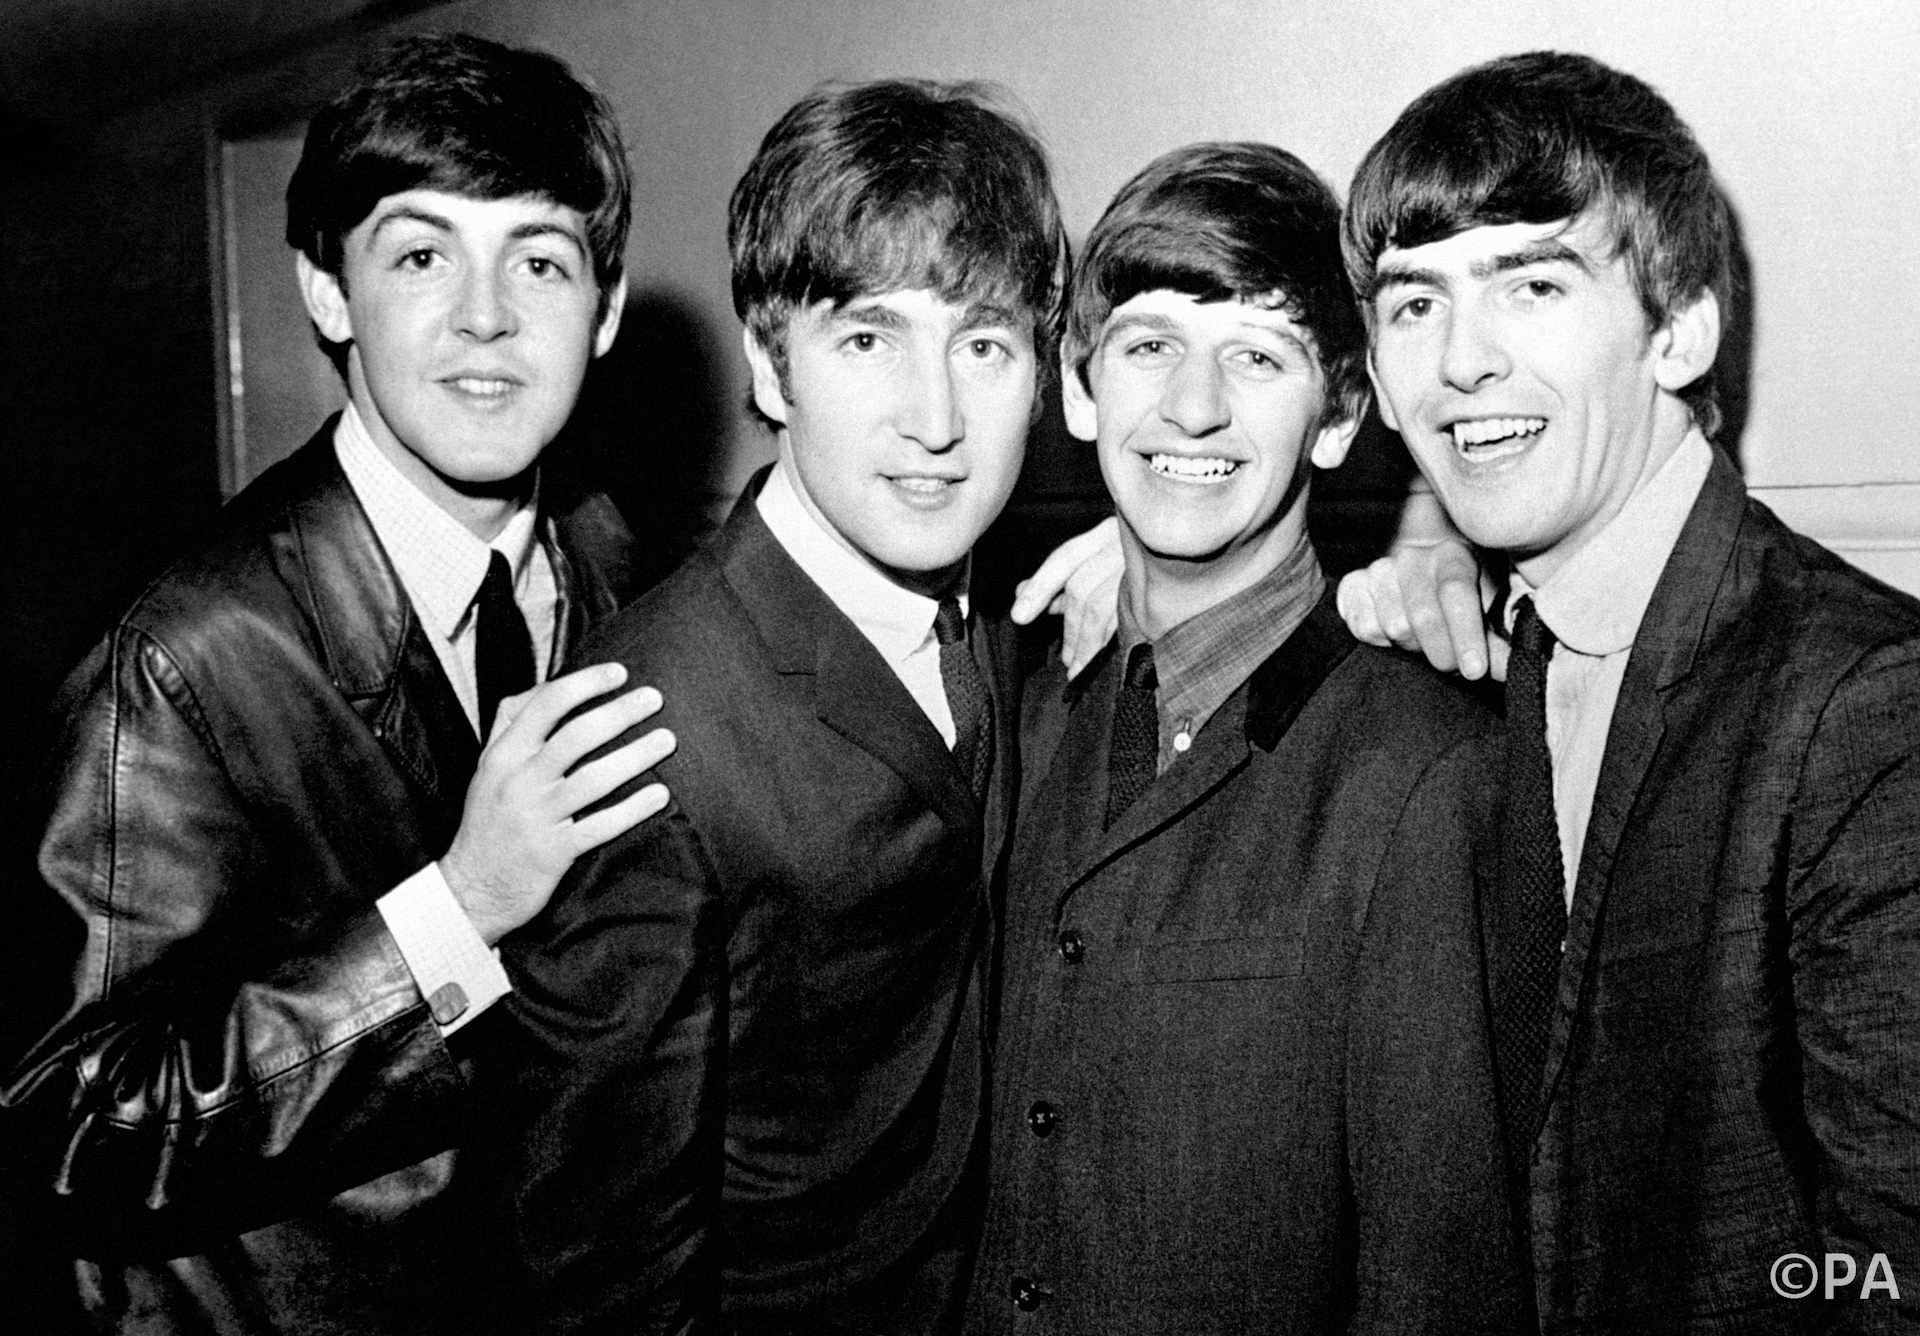 Beatlemania hit 50 years ago but why did it drive girls so mad?